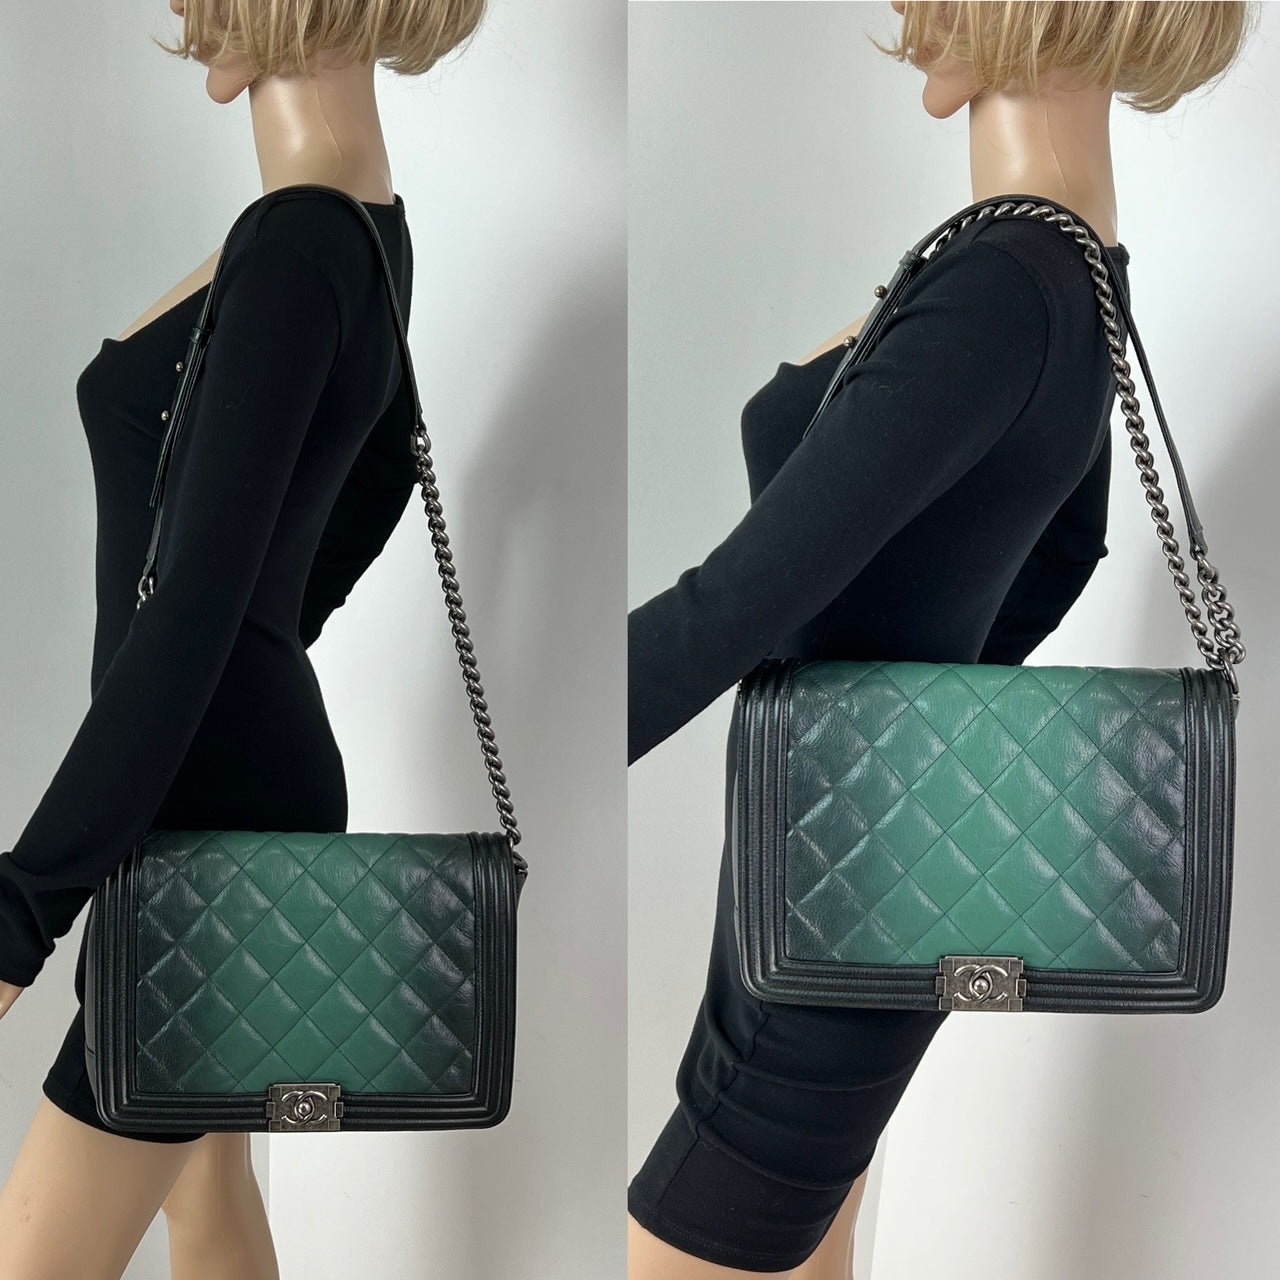 CHANEL Bag Dark Green Ombre Quilted Glazed Leather Large Boy Authentic preowned - 4